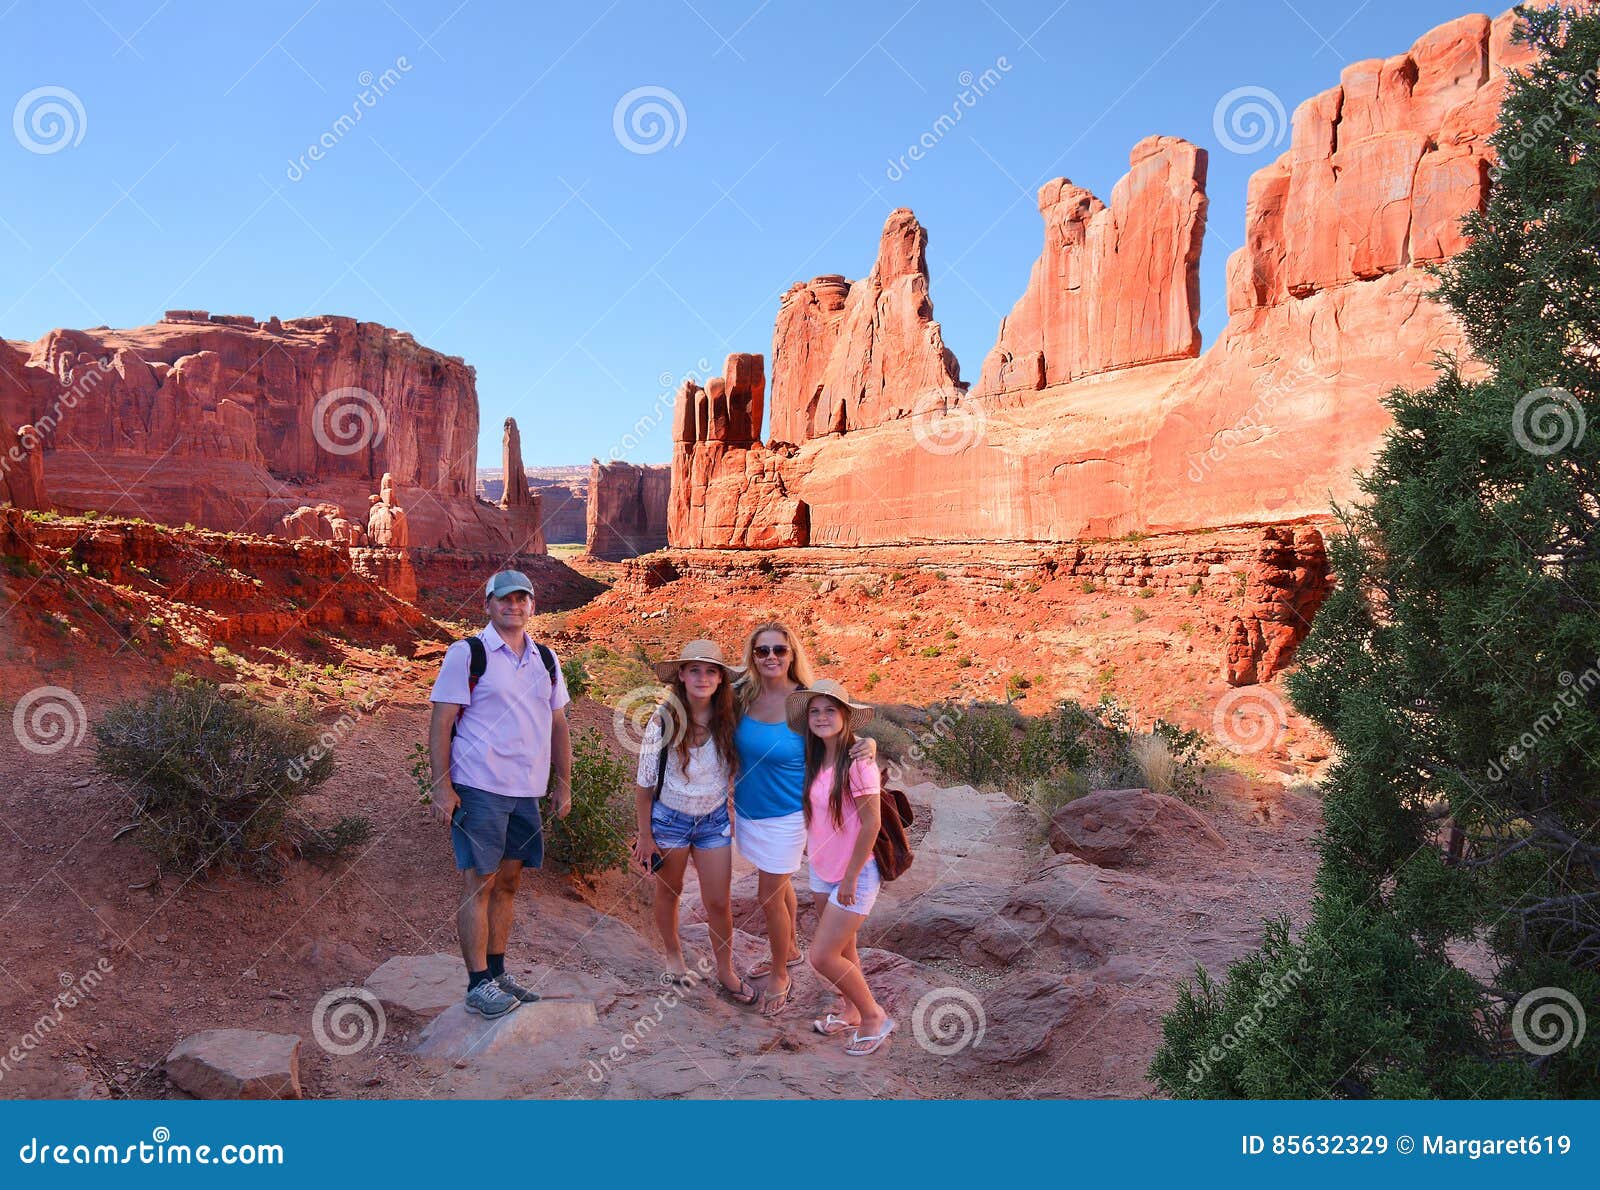 Smiling family on sightseeing trip in mountains. Family on sightseeing trip. Smiling, happy mother, father with daughters relaxing on vacation trip. Beautiful landscape made of red rocks. .Fifth Avenue, Arches National Park, Moab,Utah,USA